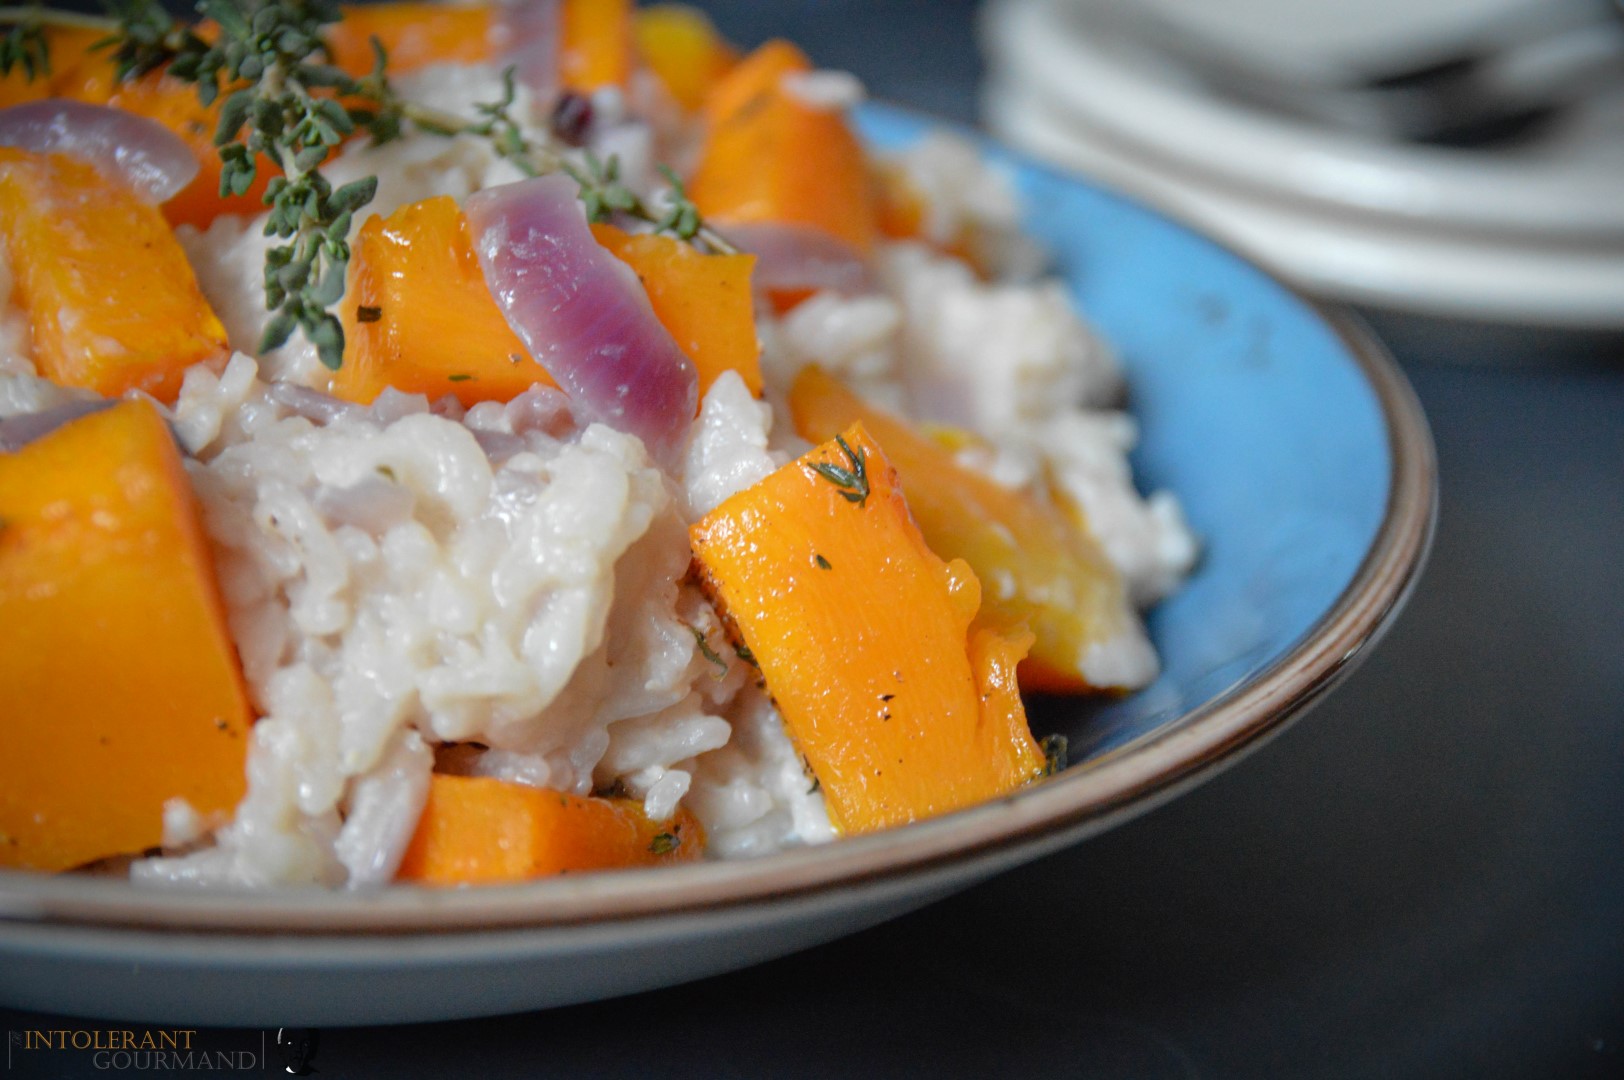 The Best Pumpkin Risotto - the perfect recipe for harvest time! It uses the iconic pumpkin, autumnal produce at its finest! Paird with creamy a2 milk, subtle thyme undertones and finished with a little goats cheese. Comfort food doesn't get much better! www.intolerantgourmand.com